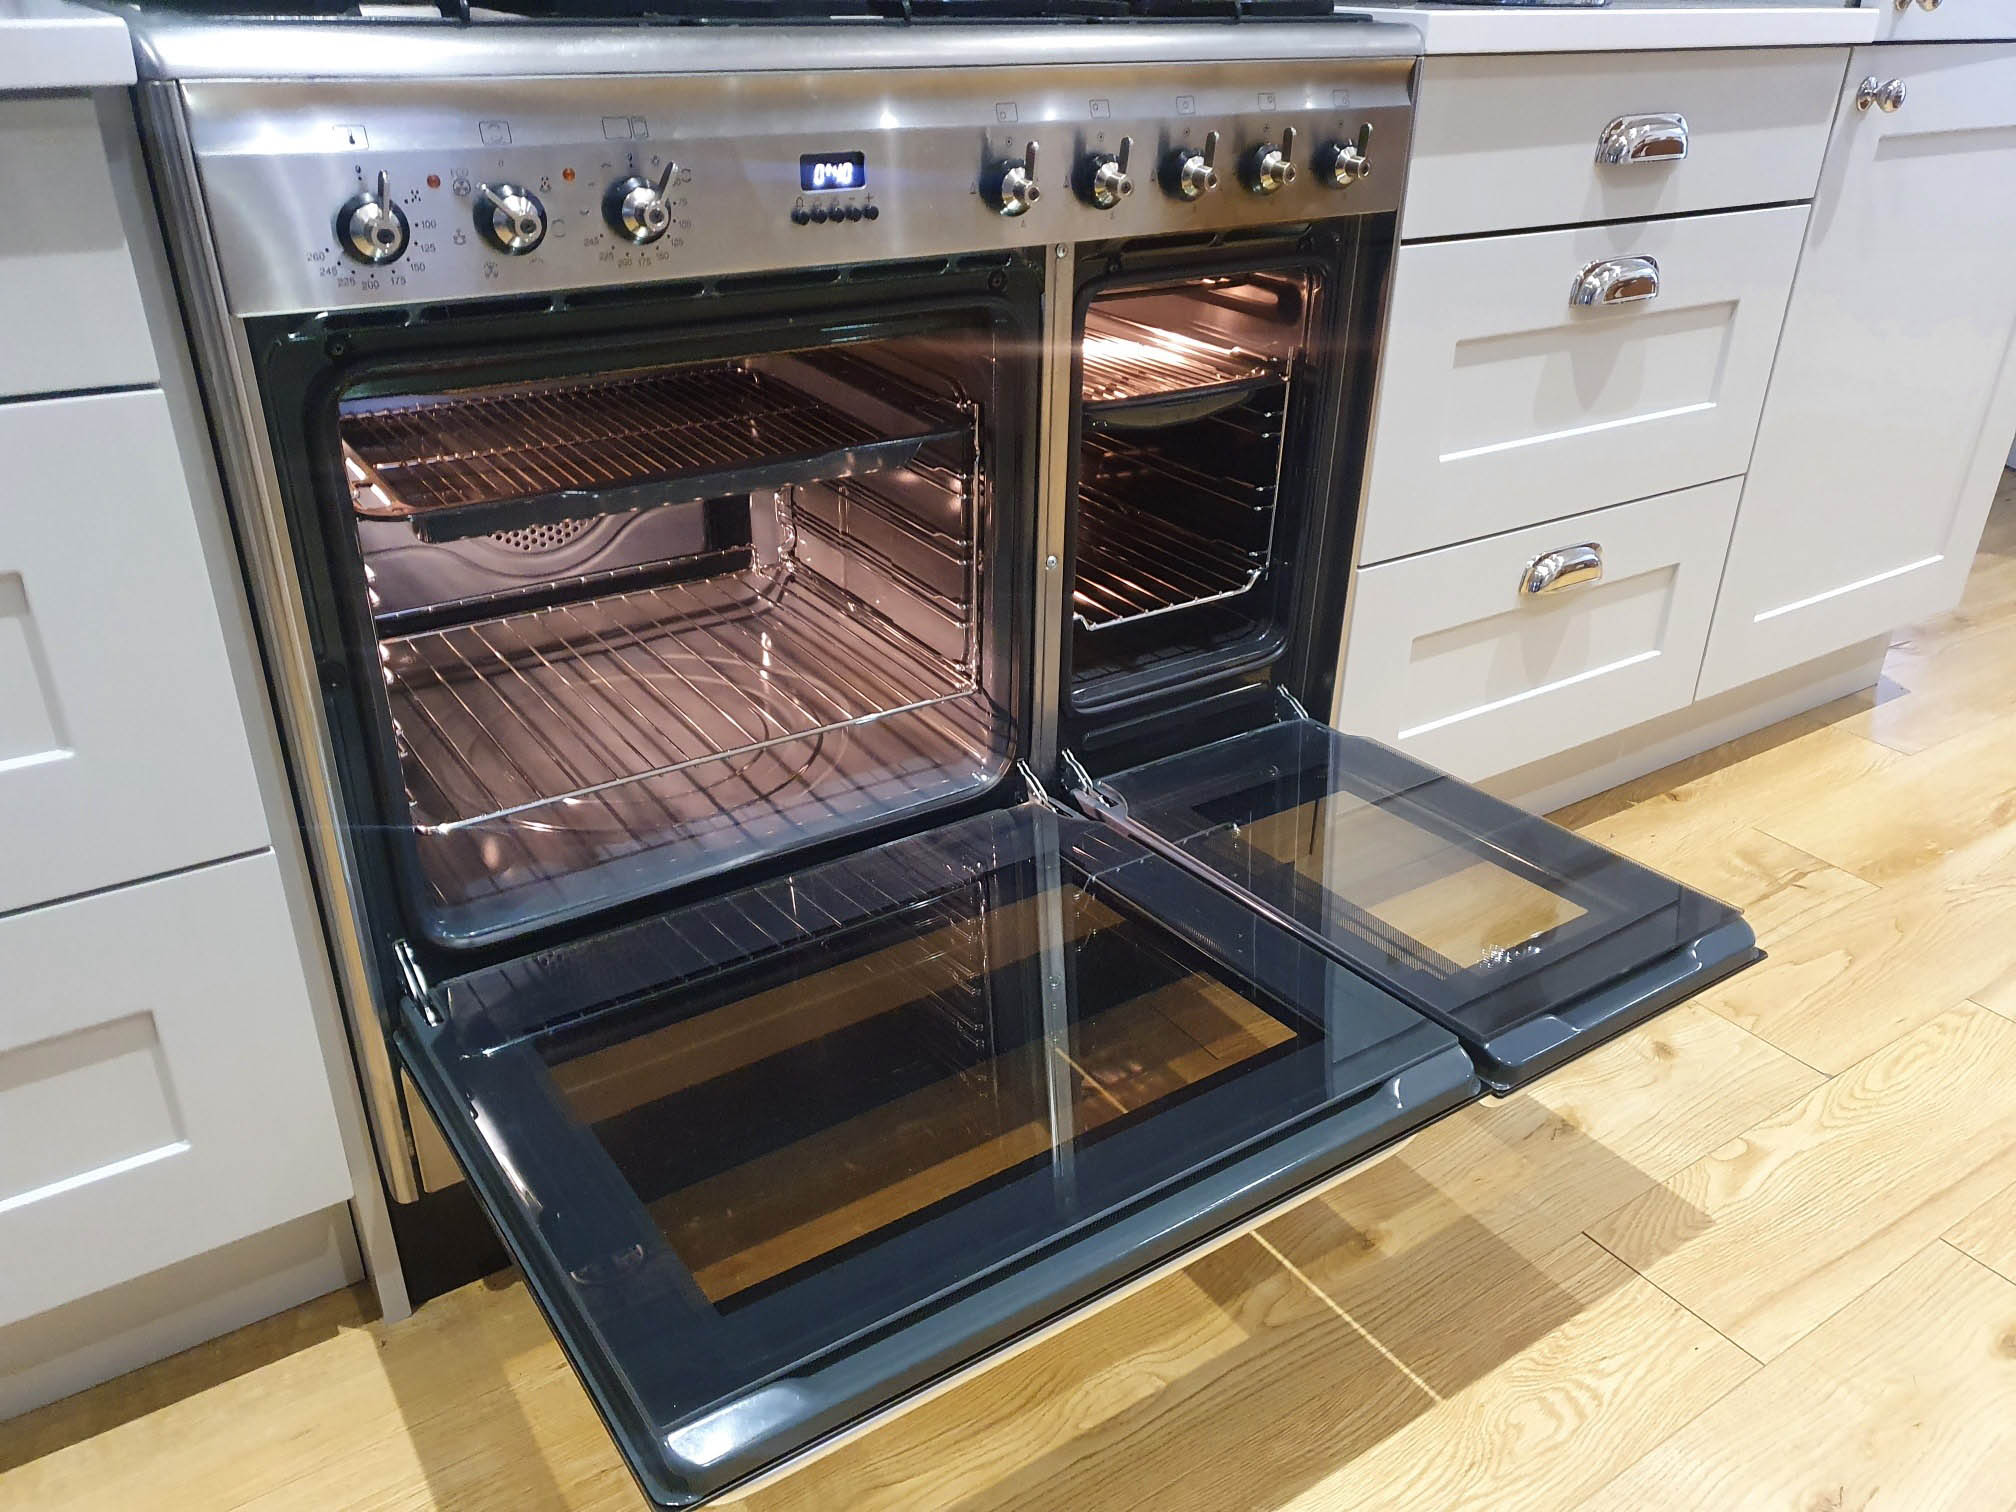 Clean Oven Inside | Clean Oven Belfast | Oven Cleaning NI | Oven Clean ni | Kitchen Cleaning NI | Oven Cleaning Belfast | Kitchen Appliance Cleaning Belfast | Oven Clean NI